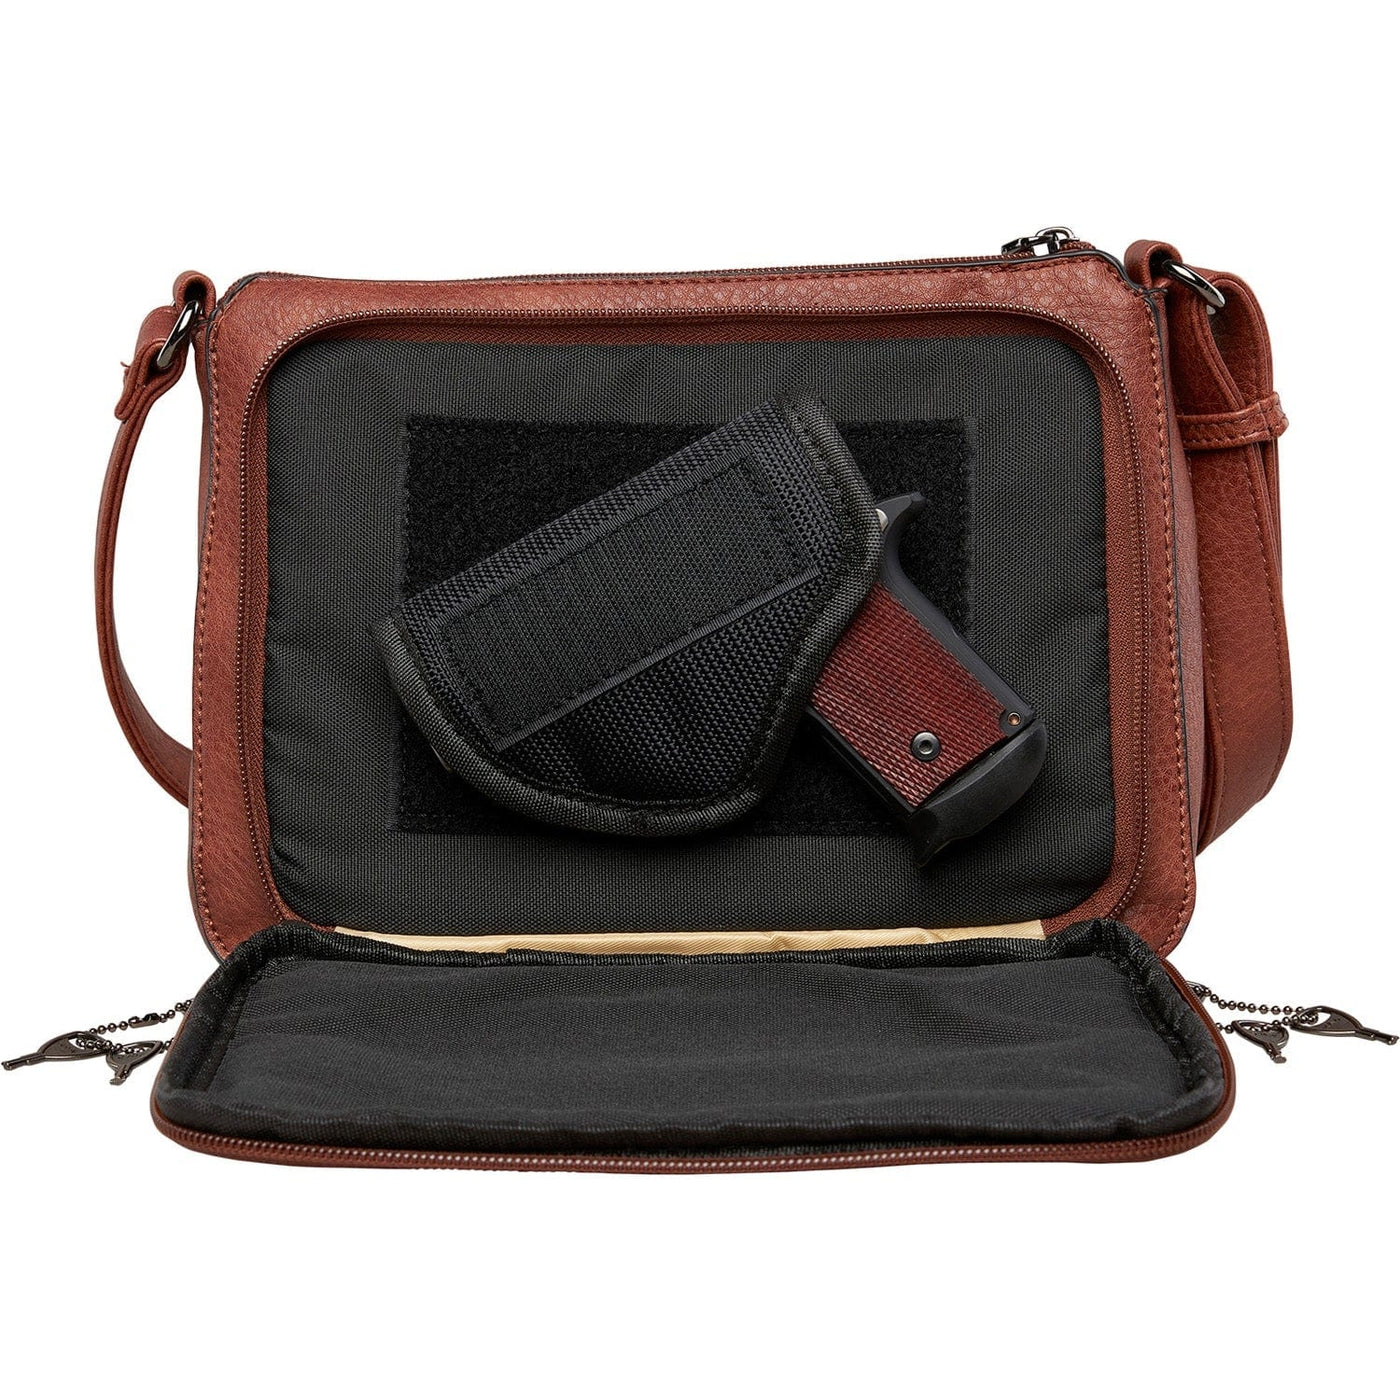 Concealed Carry Kinsley Crossbody with RFID Slim Wallet Mahogony